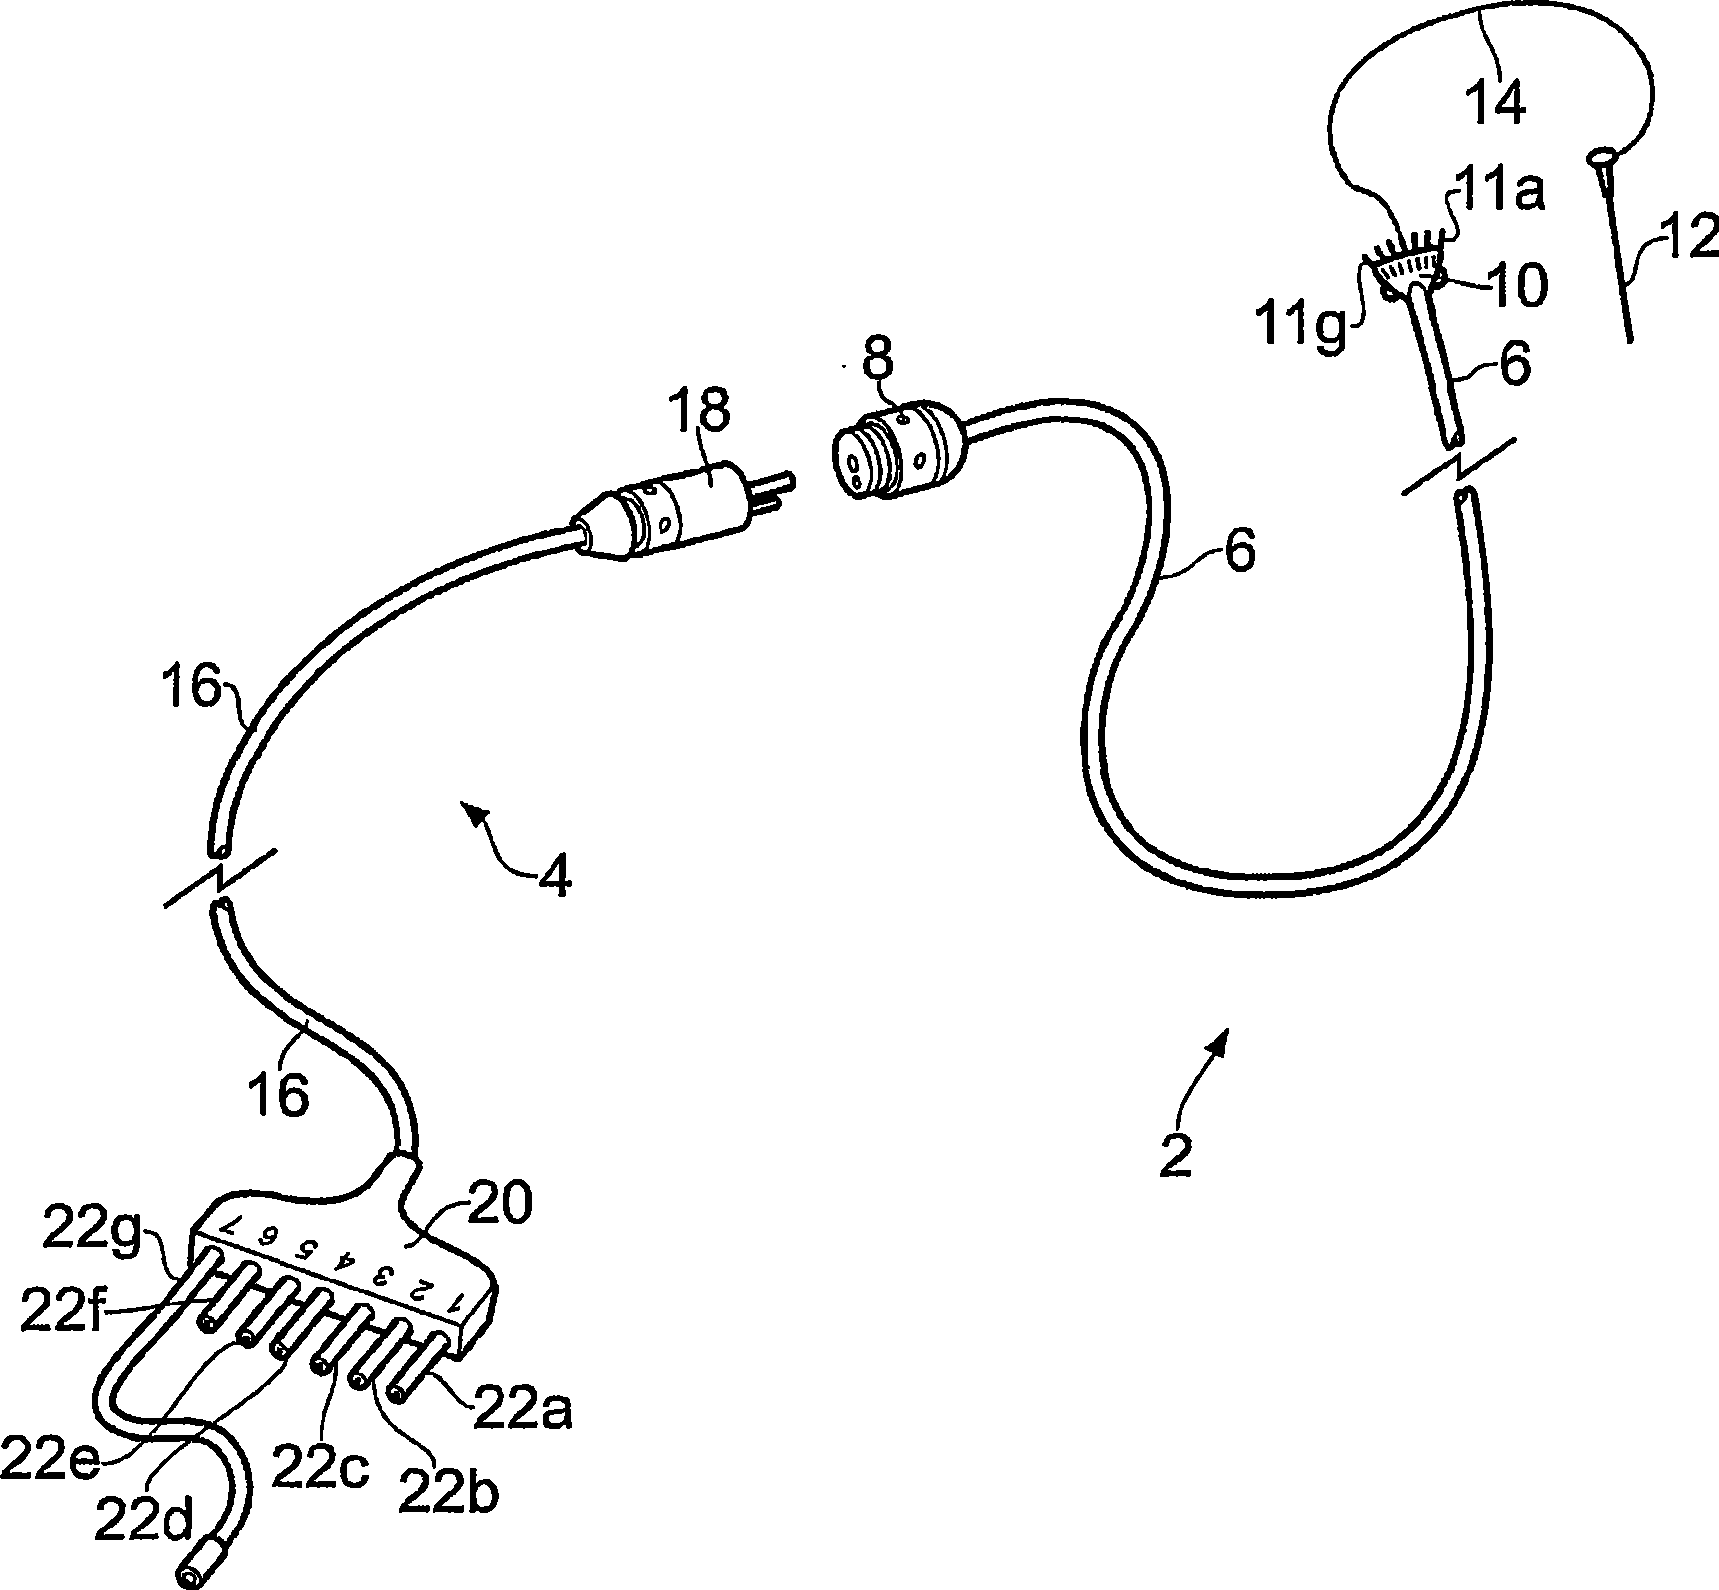 Apparatus for fluid delivery with implantable housing openable for providing access to a fluid connector